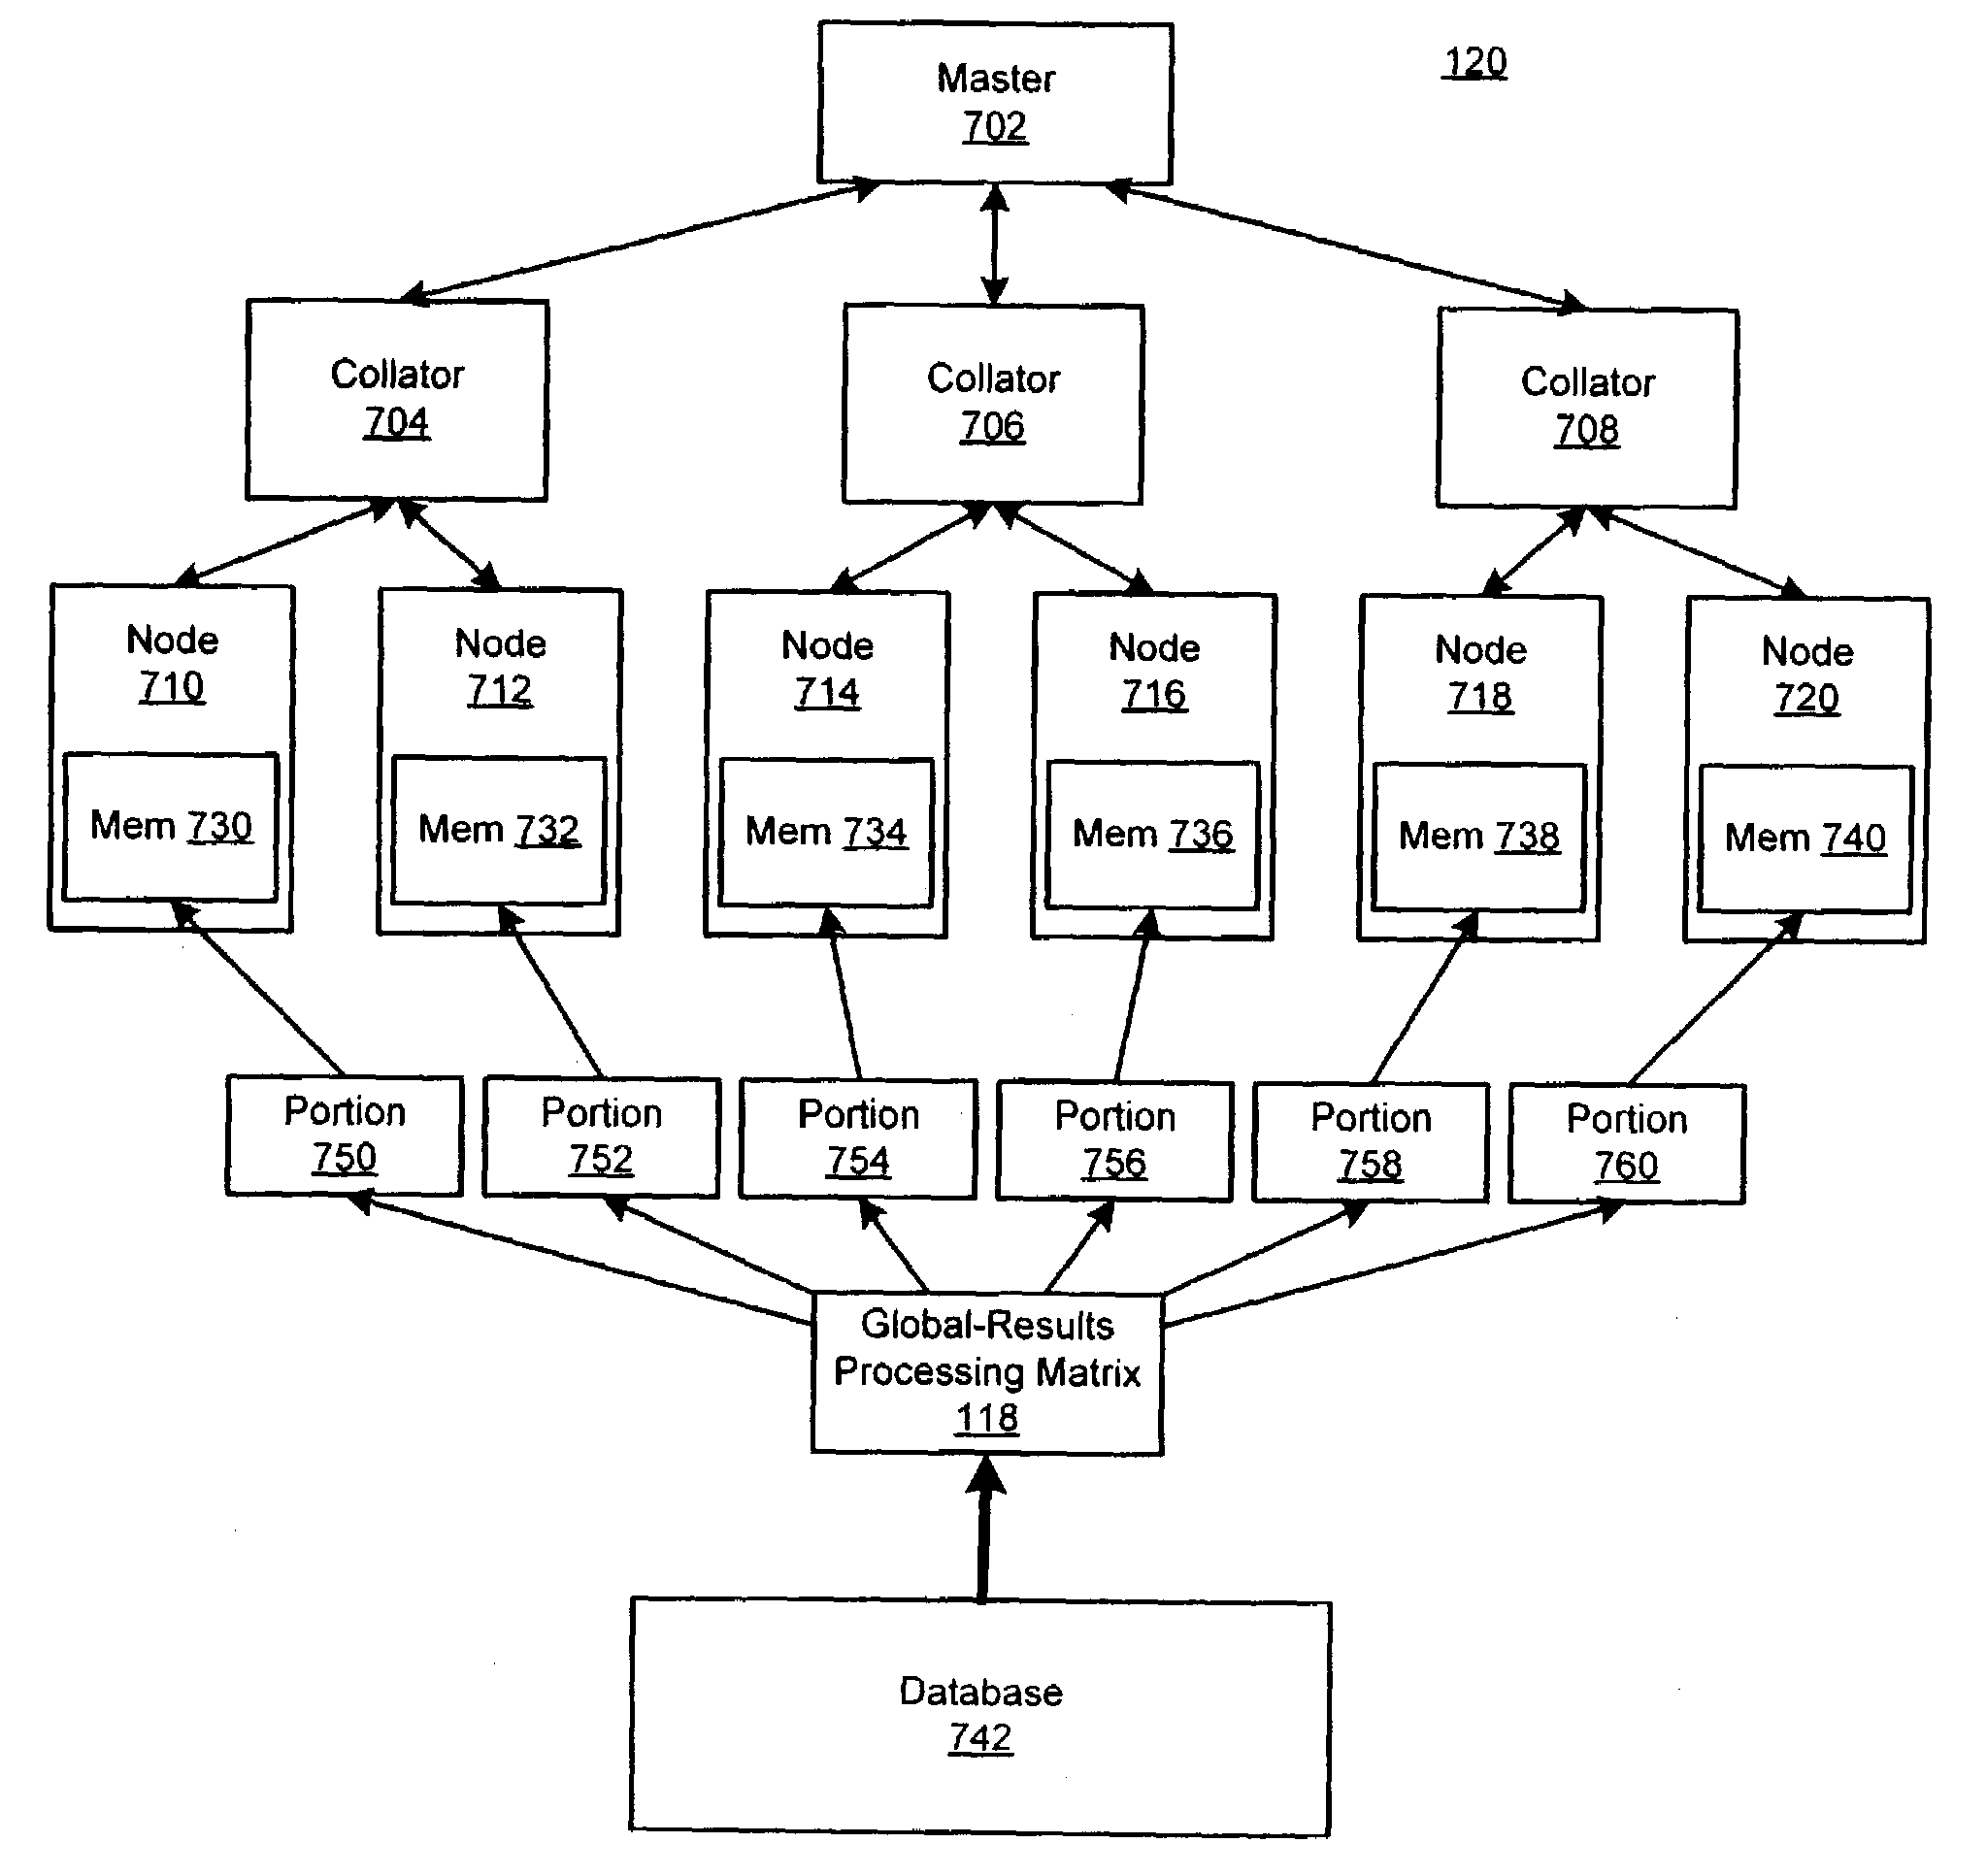 System and method for configuring a parallel-processing database system